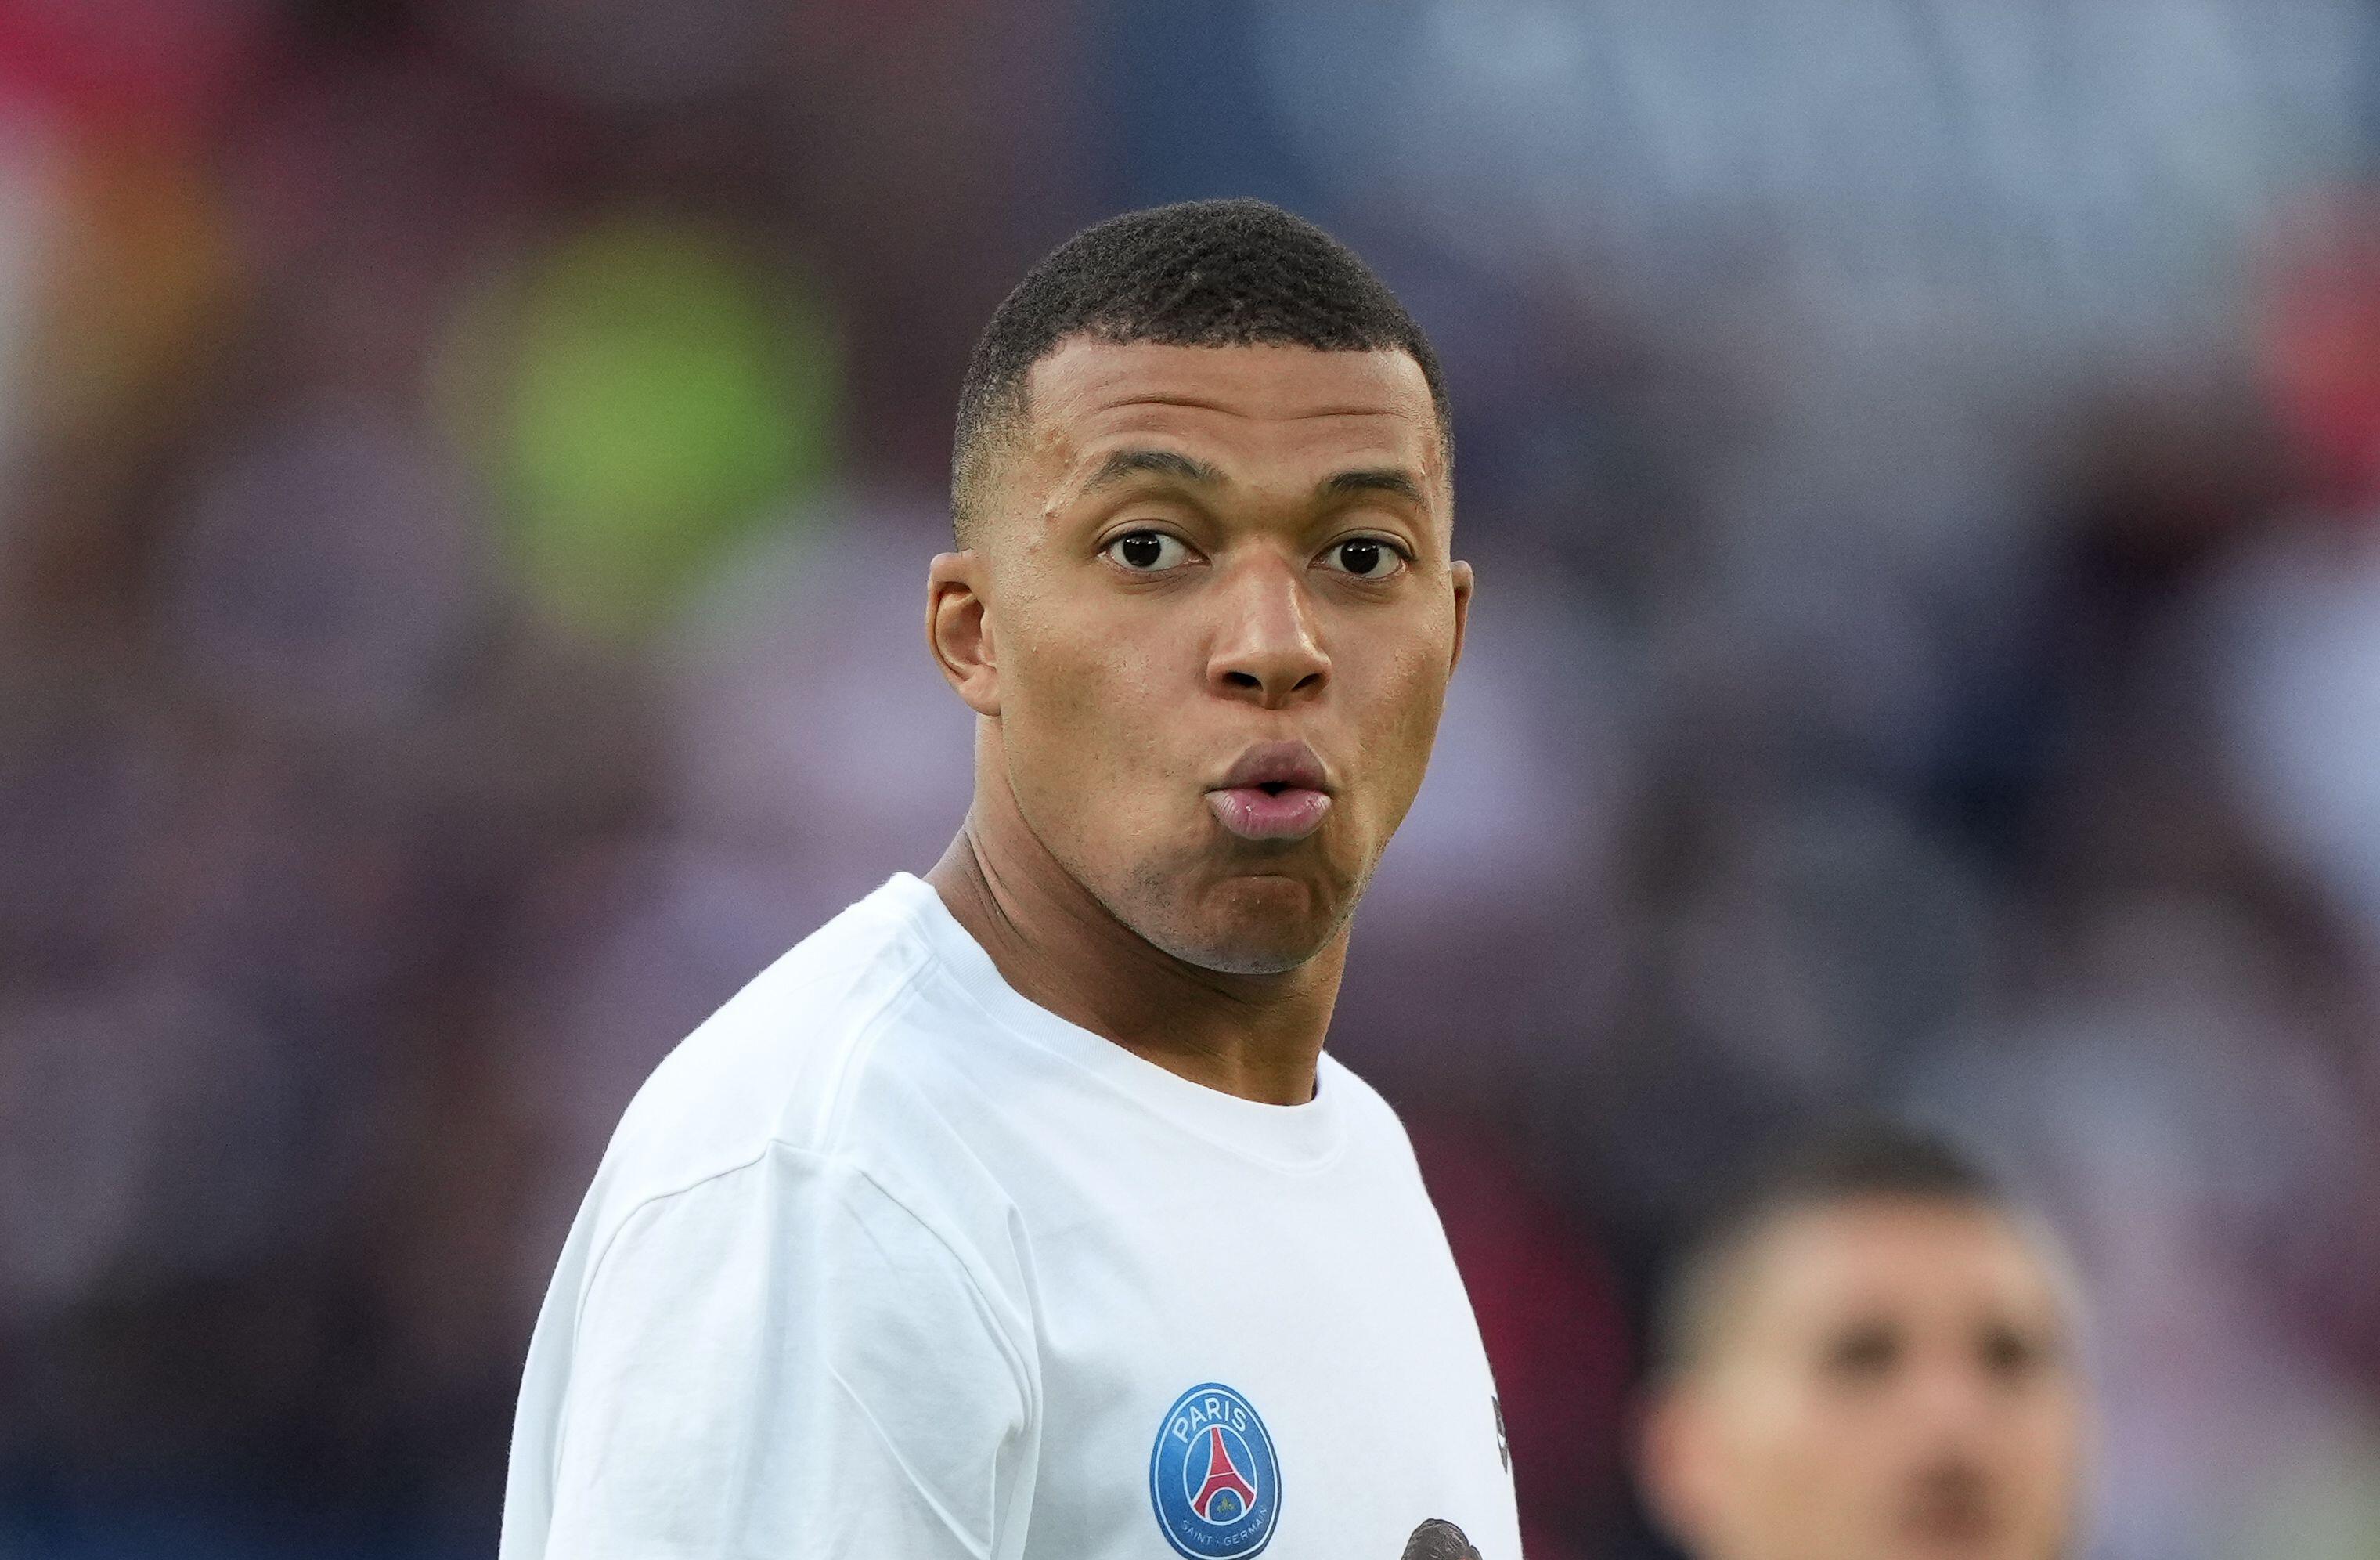 Kylian Mbappe informs PSG he will not extend contract: Media